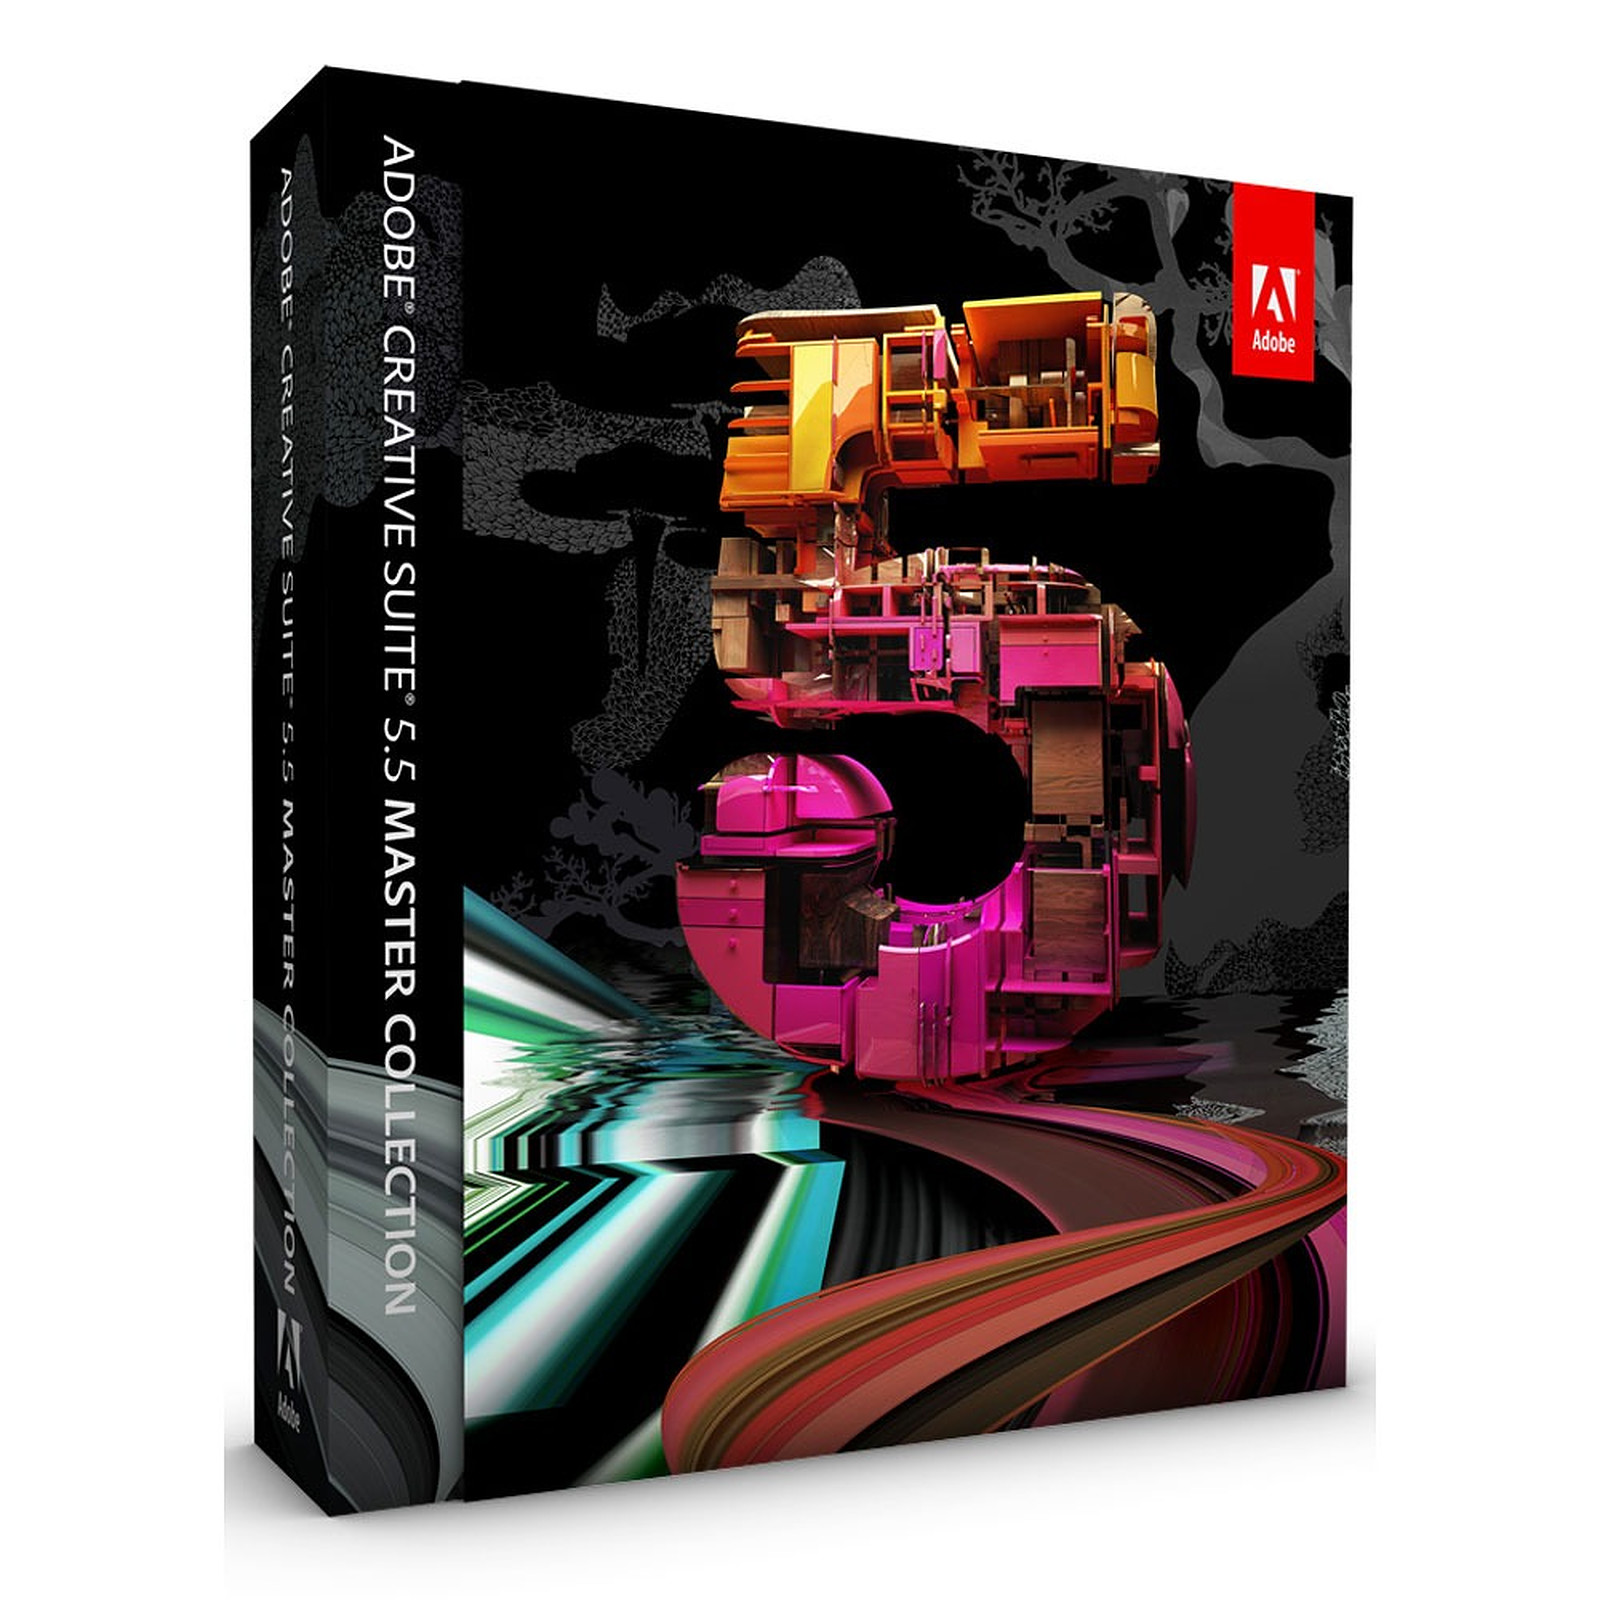 mac system requirements for adobe creative suite cc